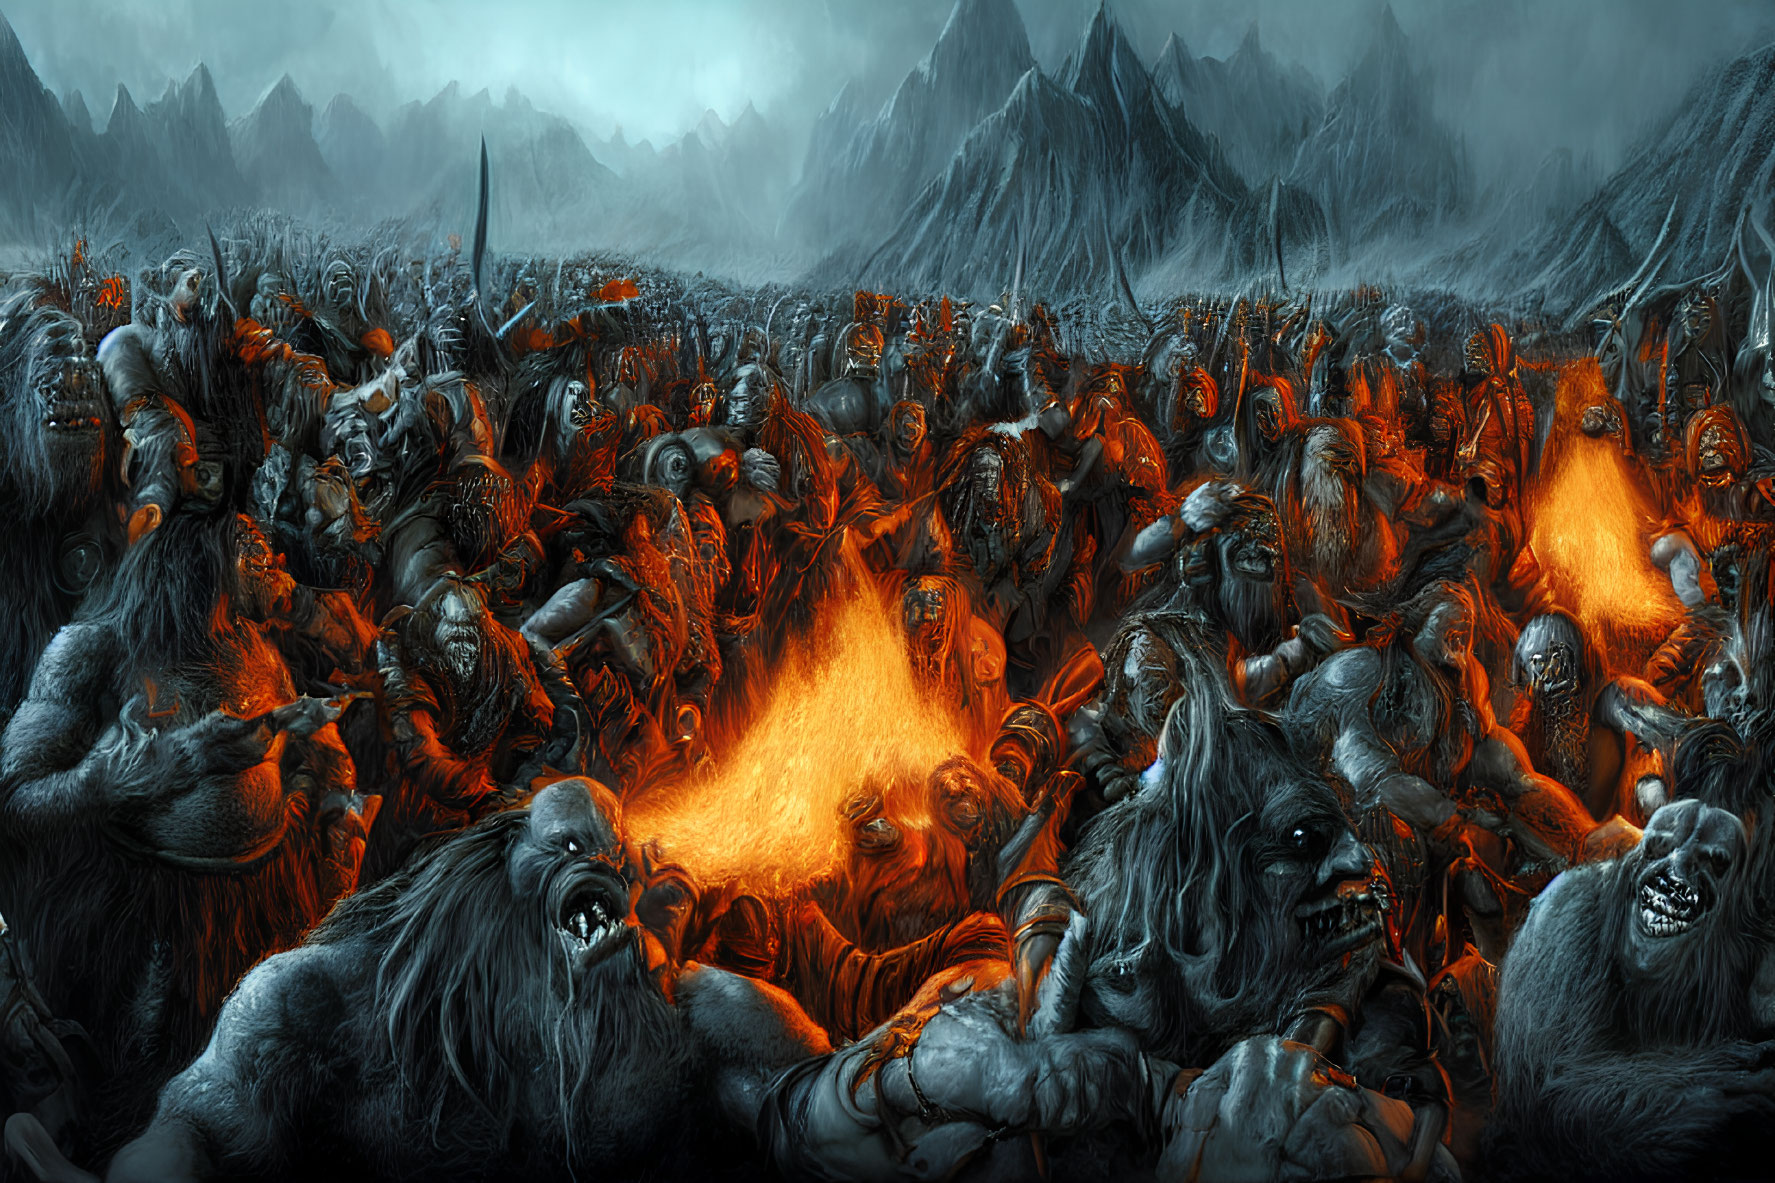 Fantasy scene: Army of orcs and creatures by fiery blaze and mountains